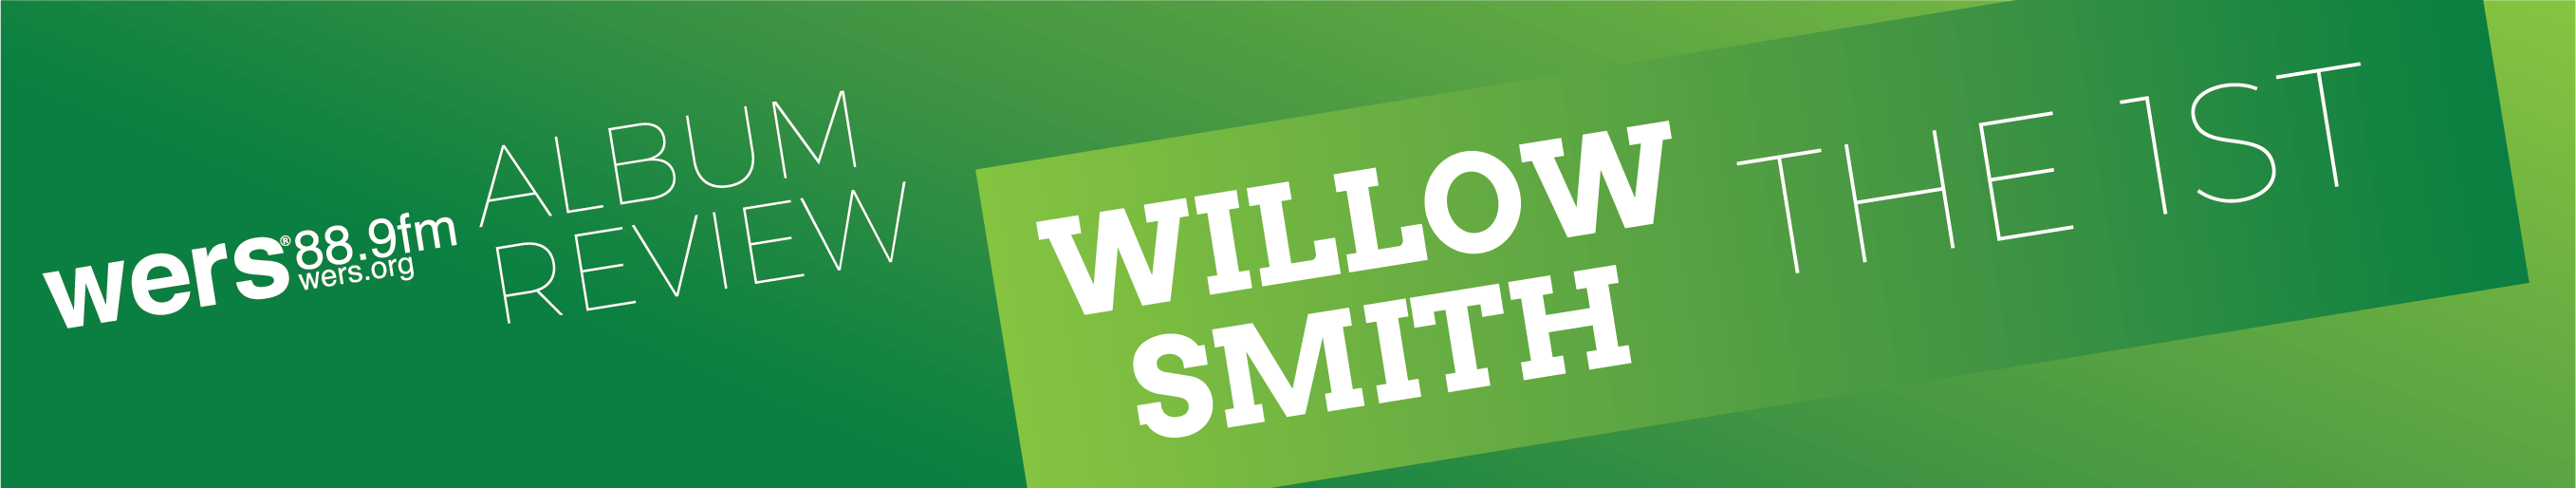 Willow Smith Album Review Banner
